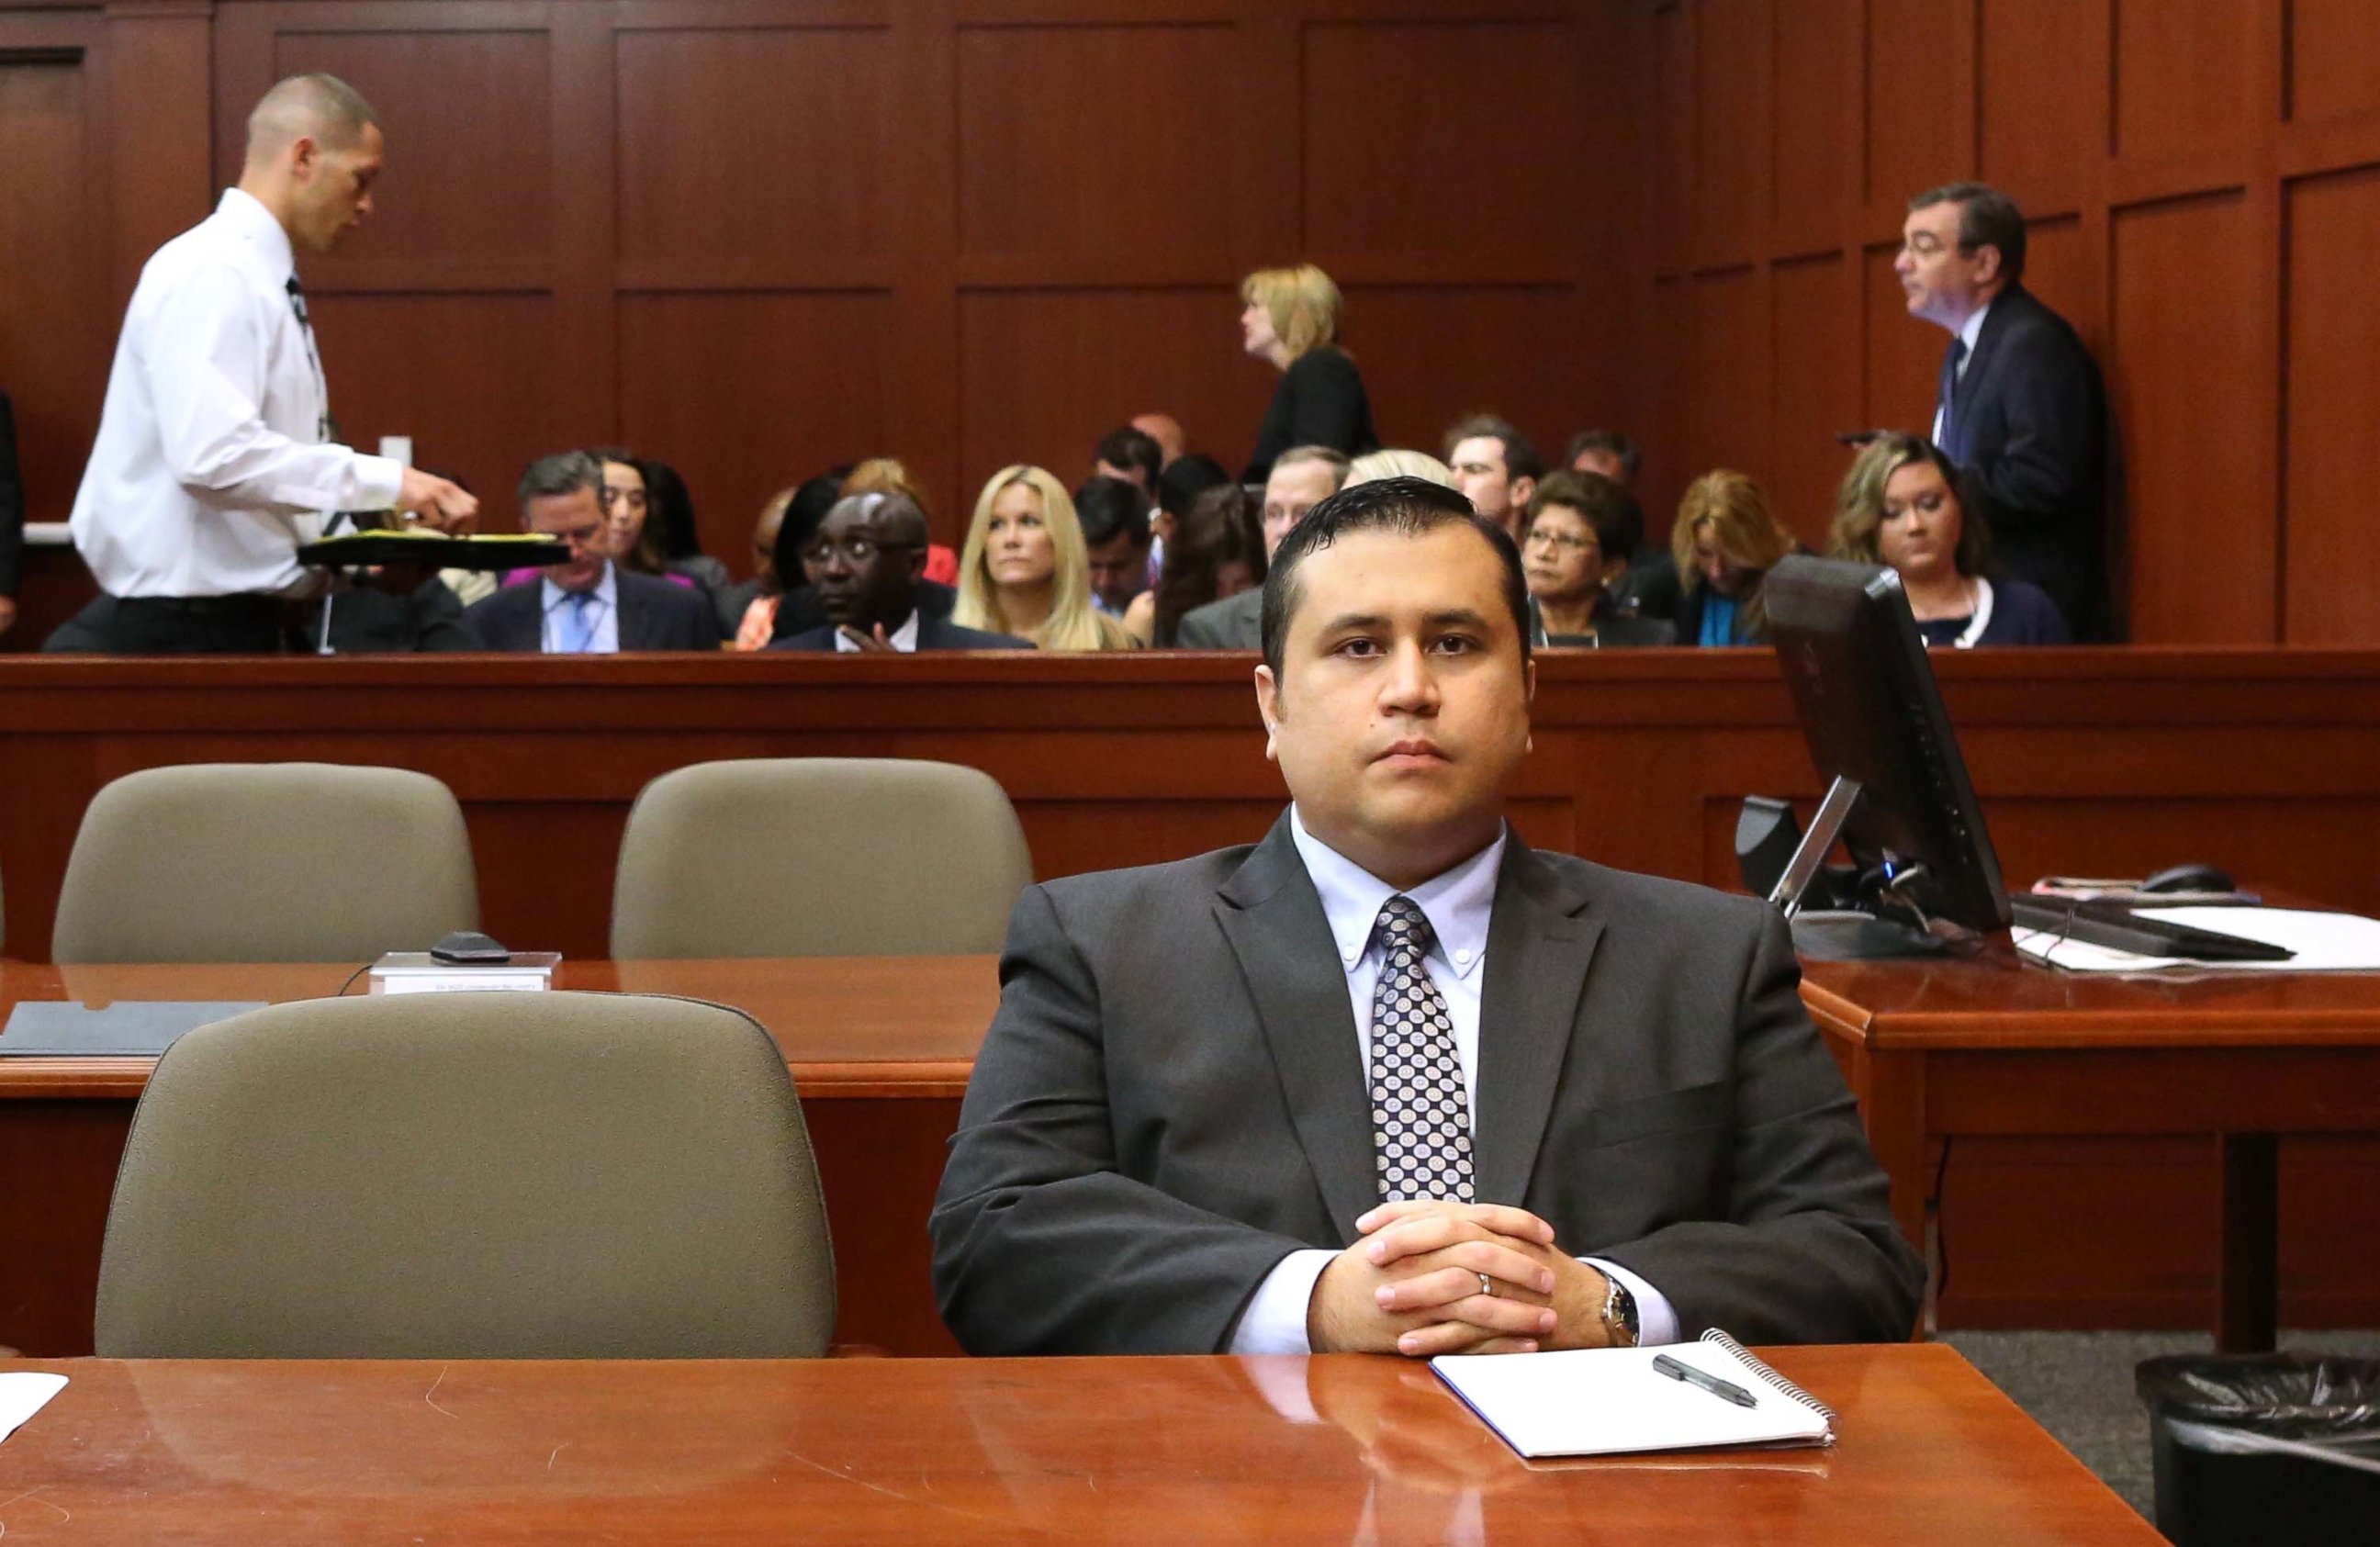 PHOTO: George Zimmerman waits for his defense counsel to arrive in Seminole circuit court, on the 11th day of his murder trial in the 2012 death of Trayvon Martin, June 24, 2013 in Sanford, Fla.